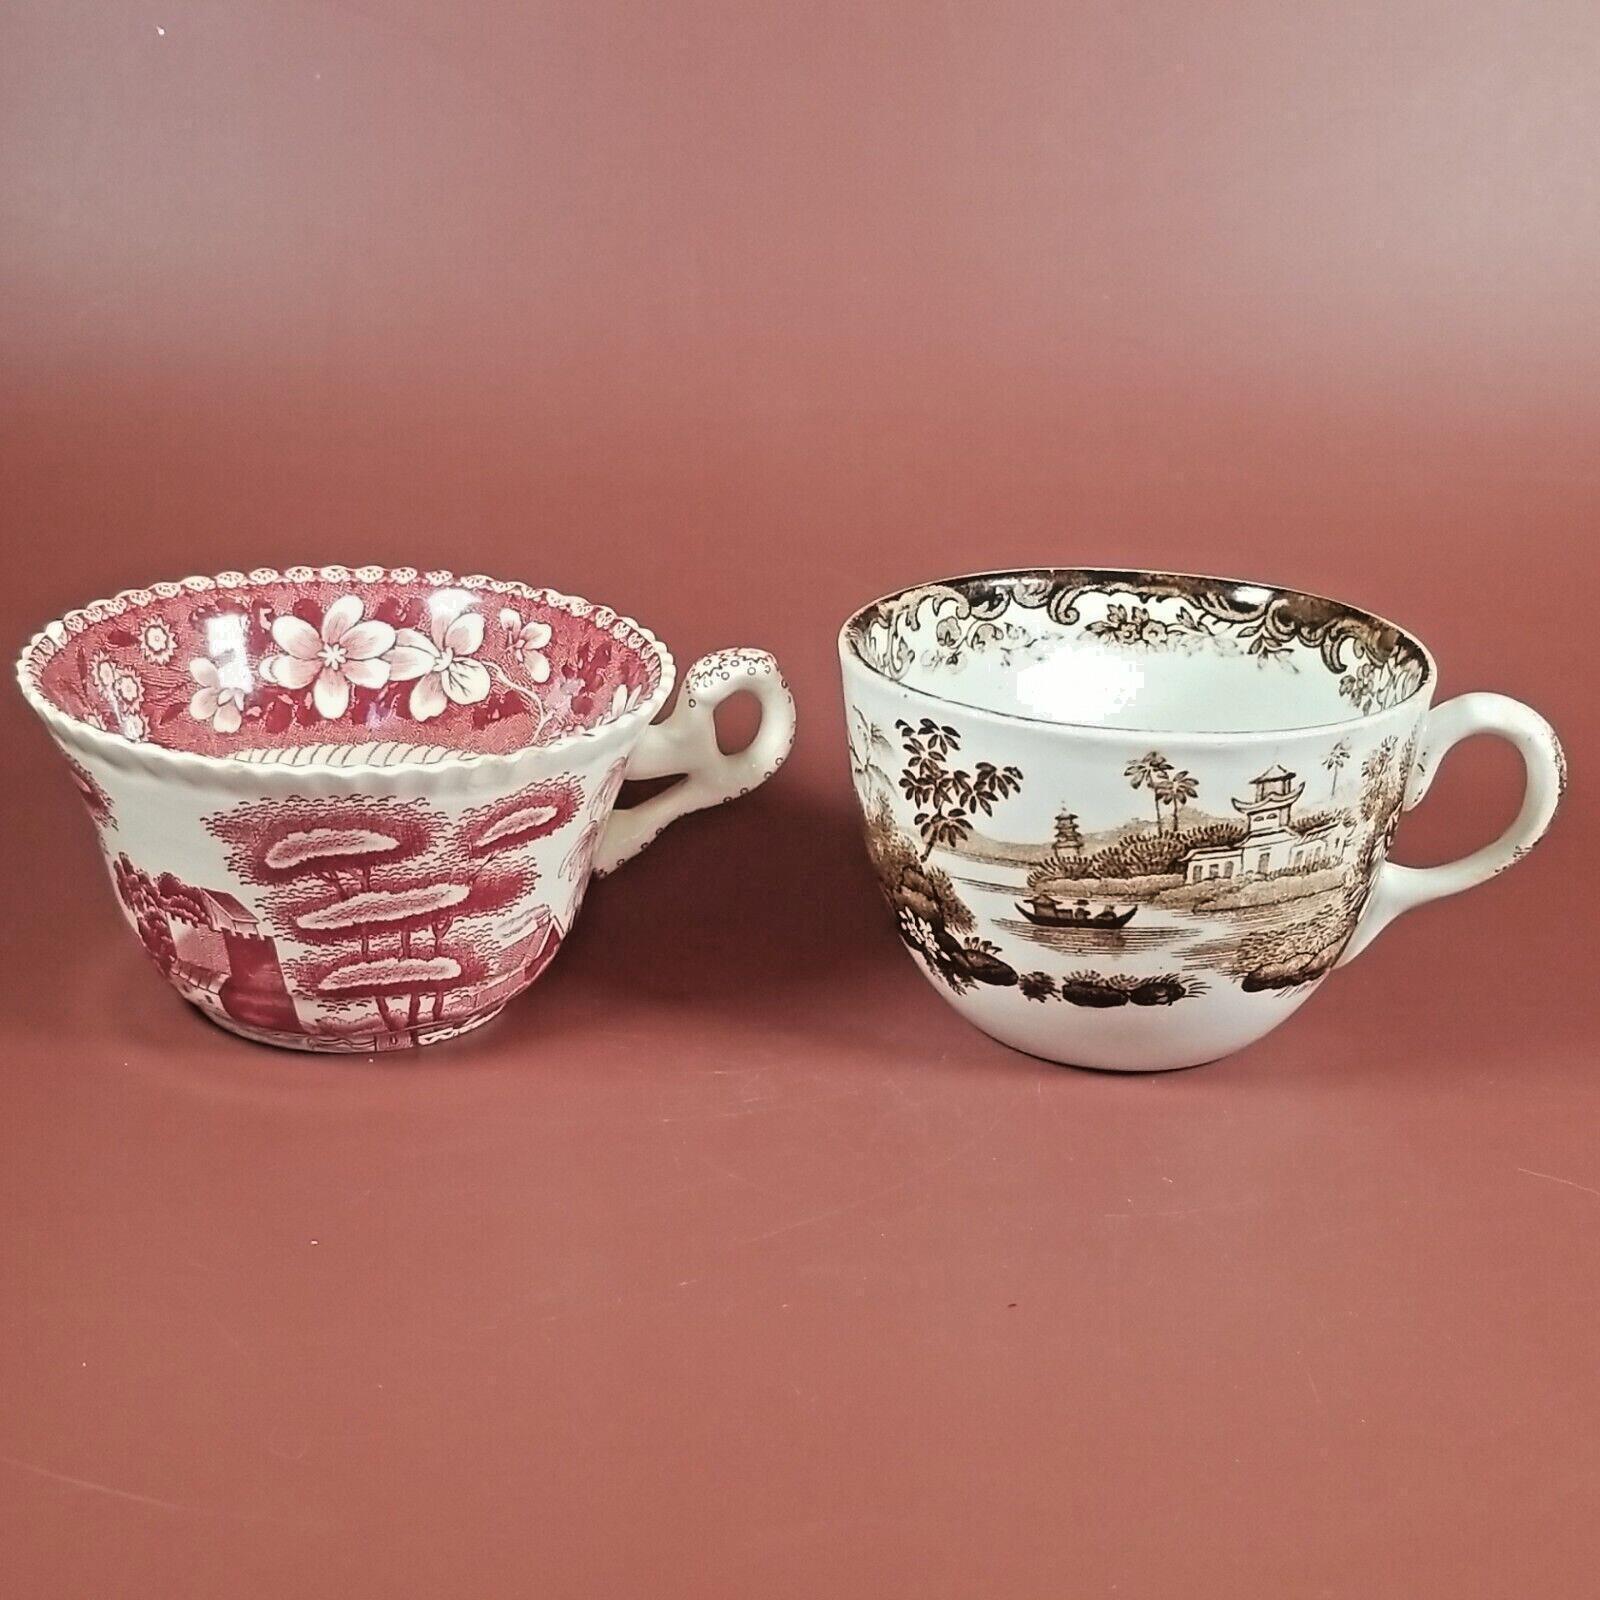 Lot of 2 Vintage Tea Cups 1 Copeland Spodes Tower and One Unbranded